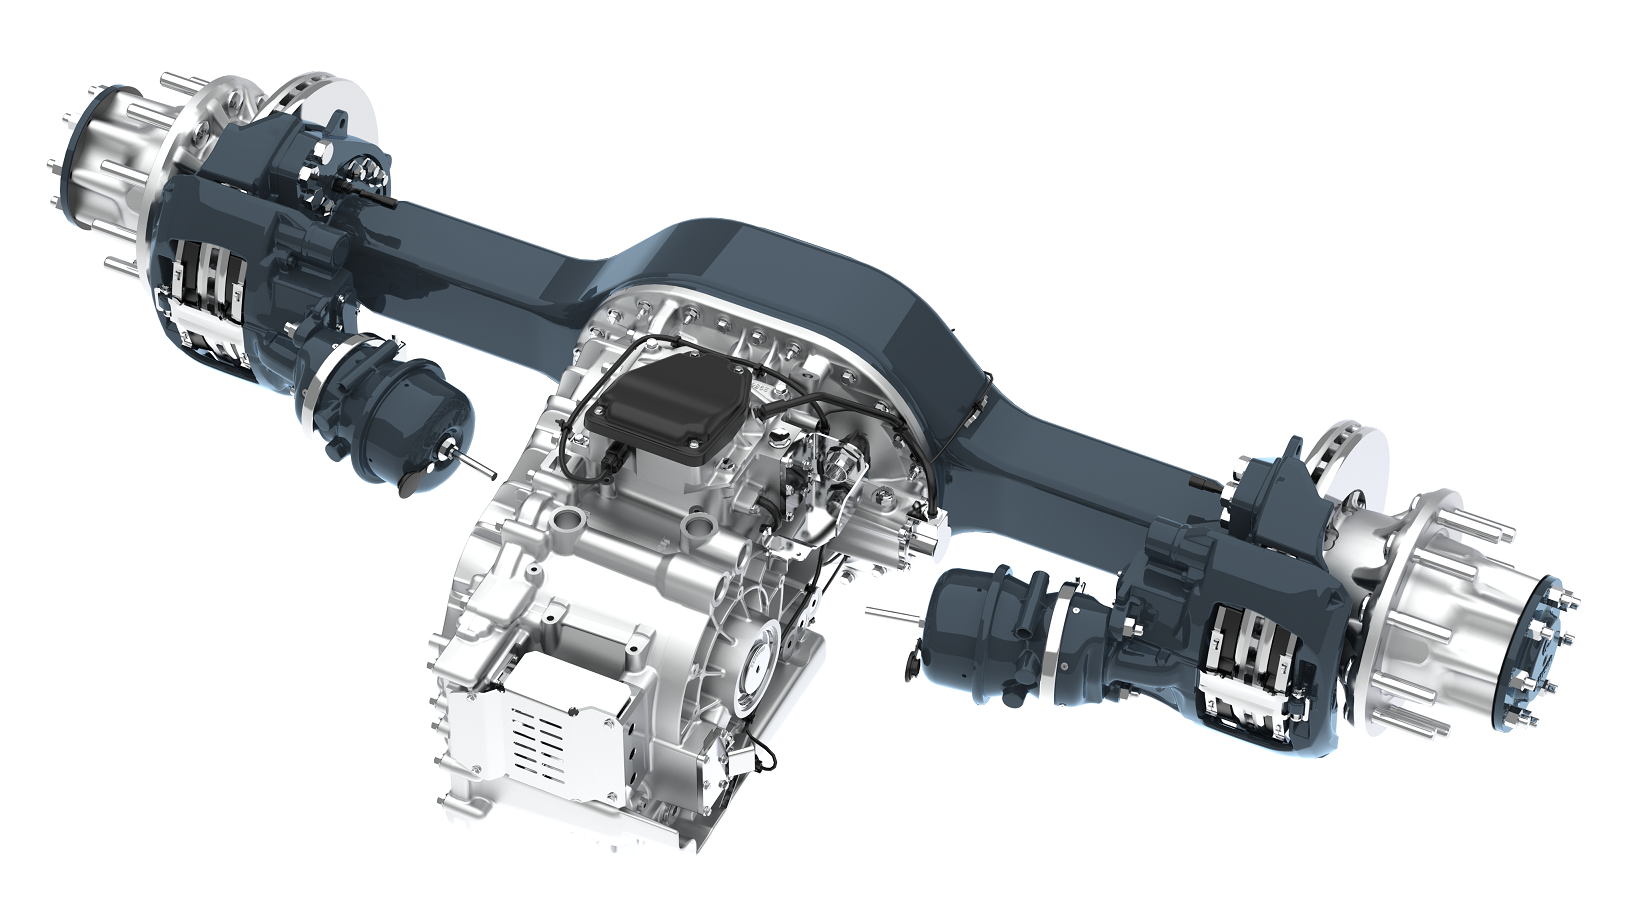 Anadolu Isuzu to integrate Allison electric axles into light-duty truck and  midibus platforms - PMV Middle East